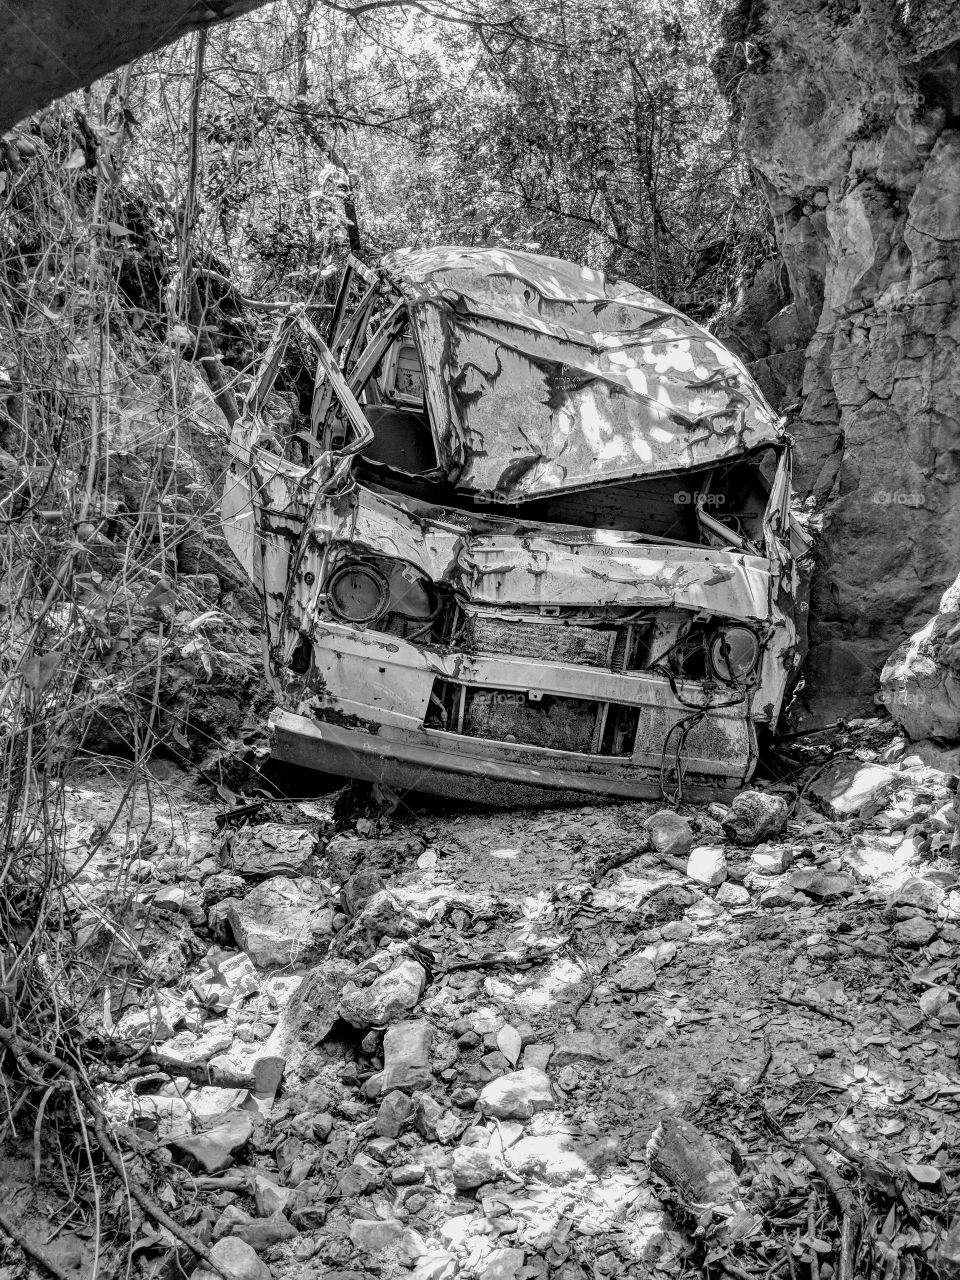 Old car junkyard in a dryed river bed